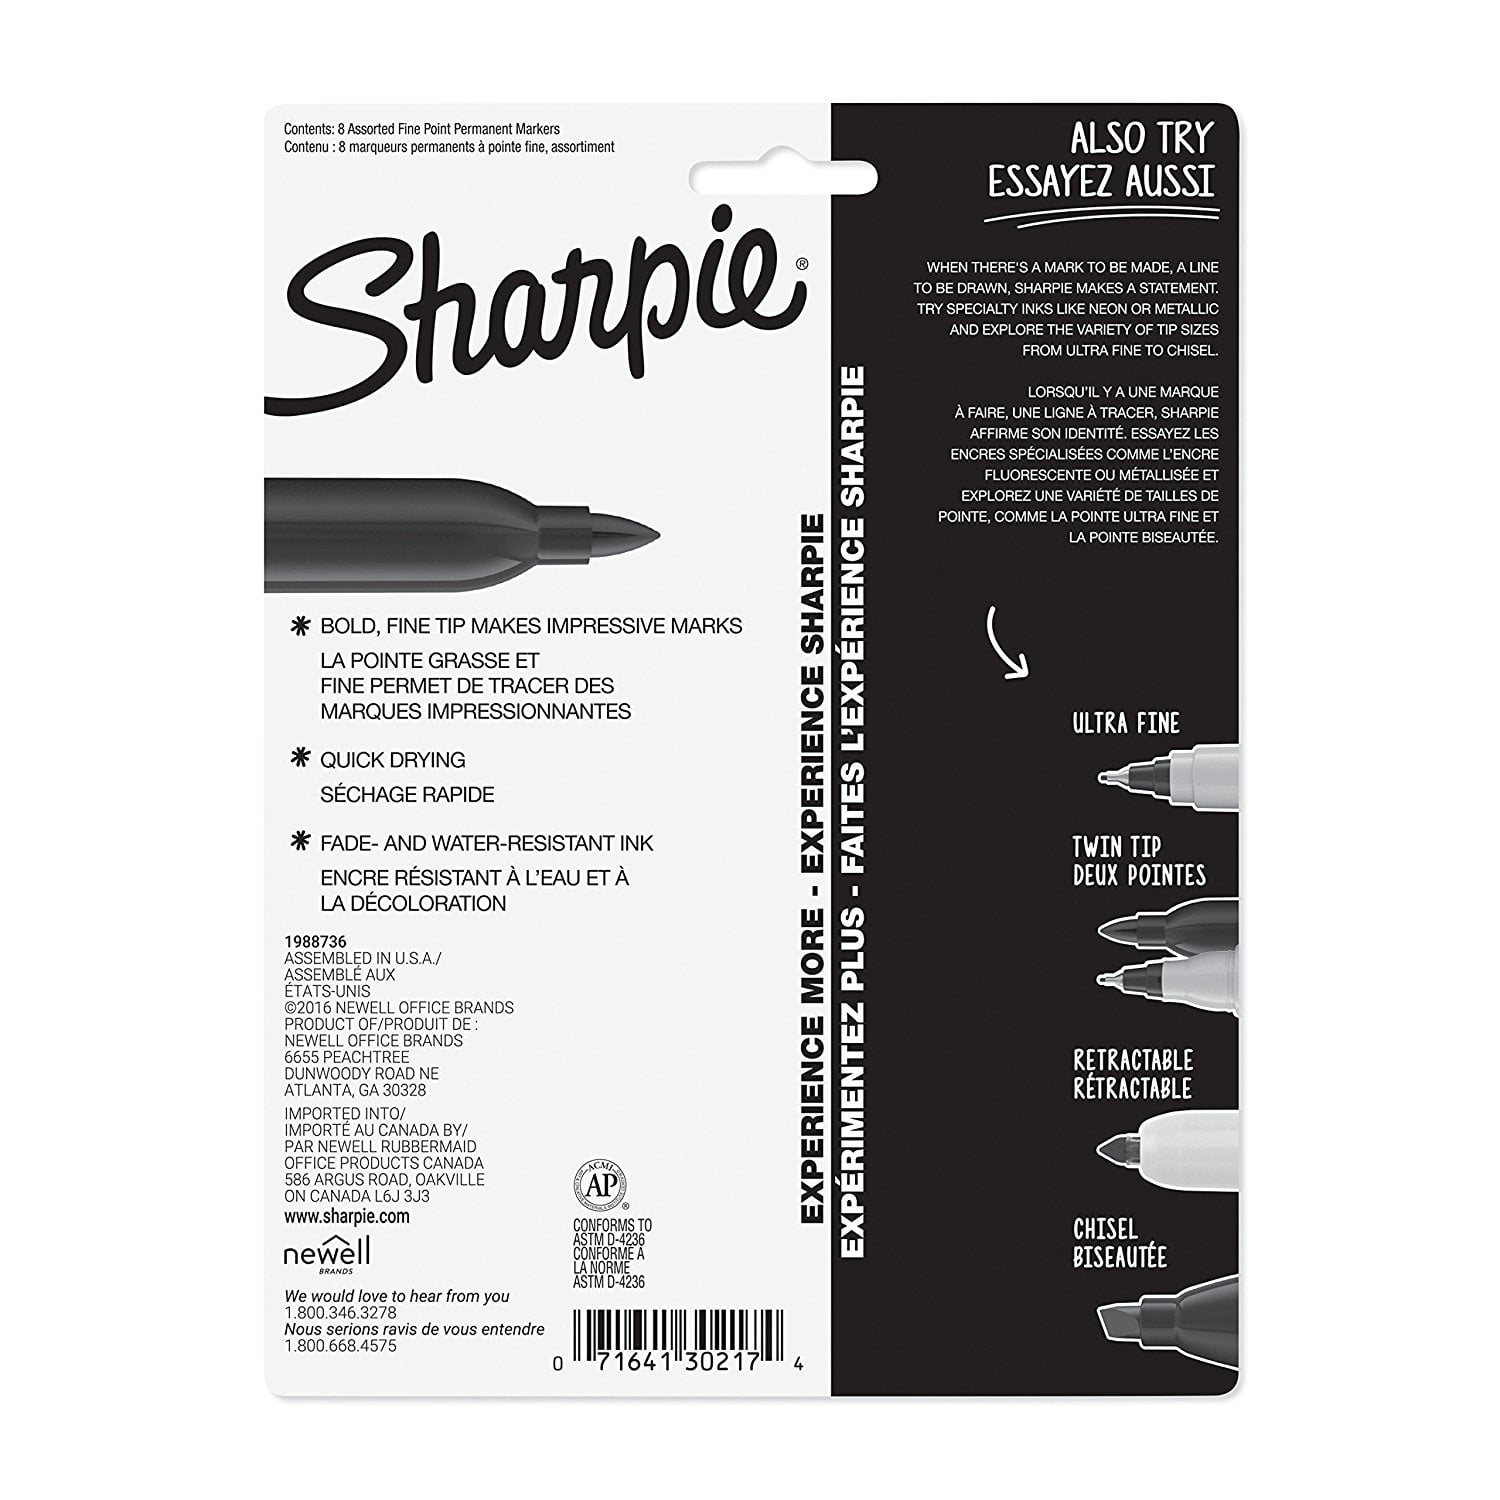 SHARPIE Ultra Fine Point Non-Toxic Permanent Marker Assorted Colors 8 ct NEW